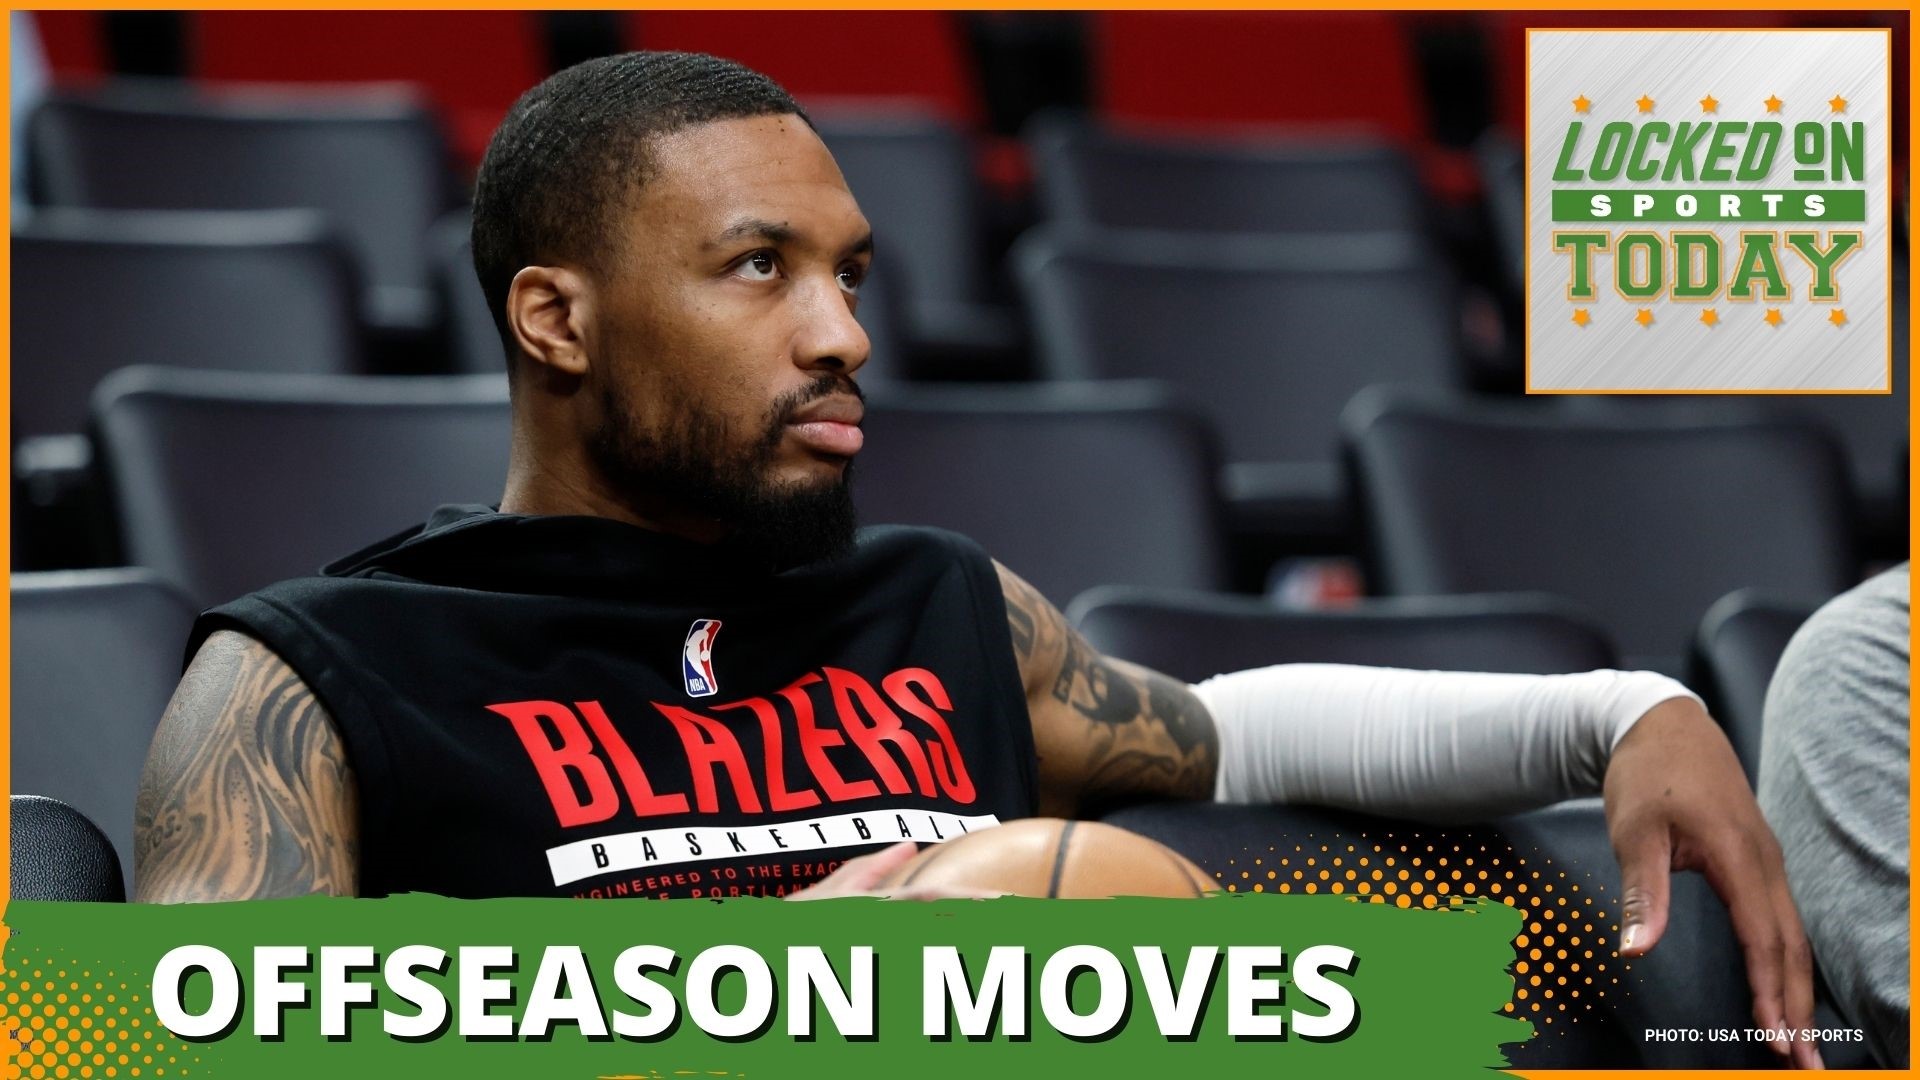 Discussing the day's top sports stories from all eyes on the Blazers in the NBA offseason to the Houston Astros getting it together after a slow start to the season.